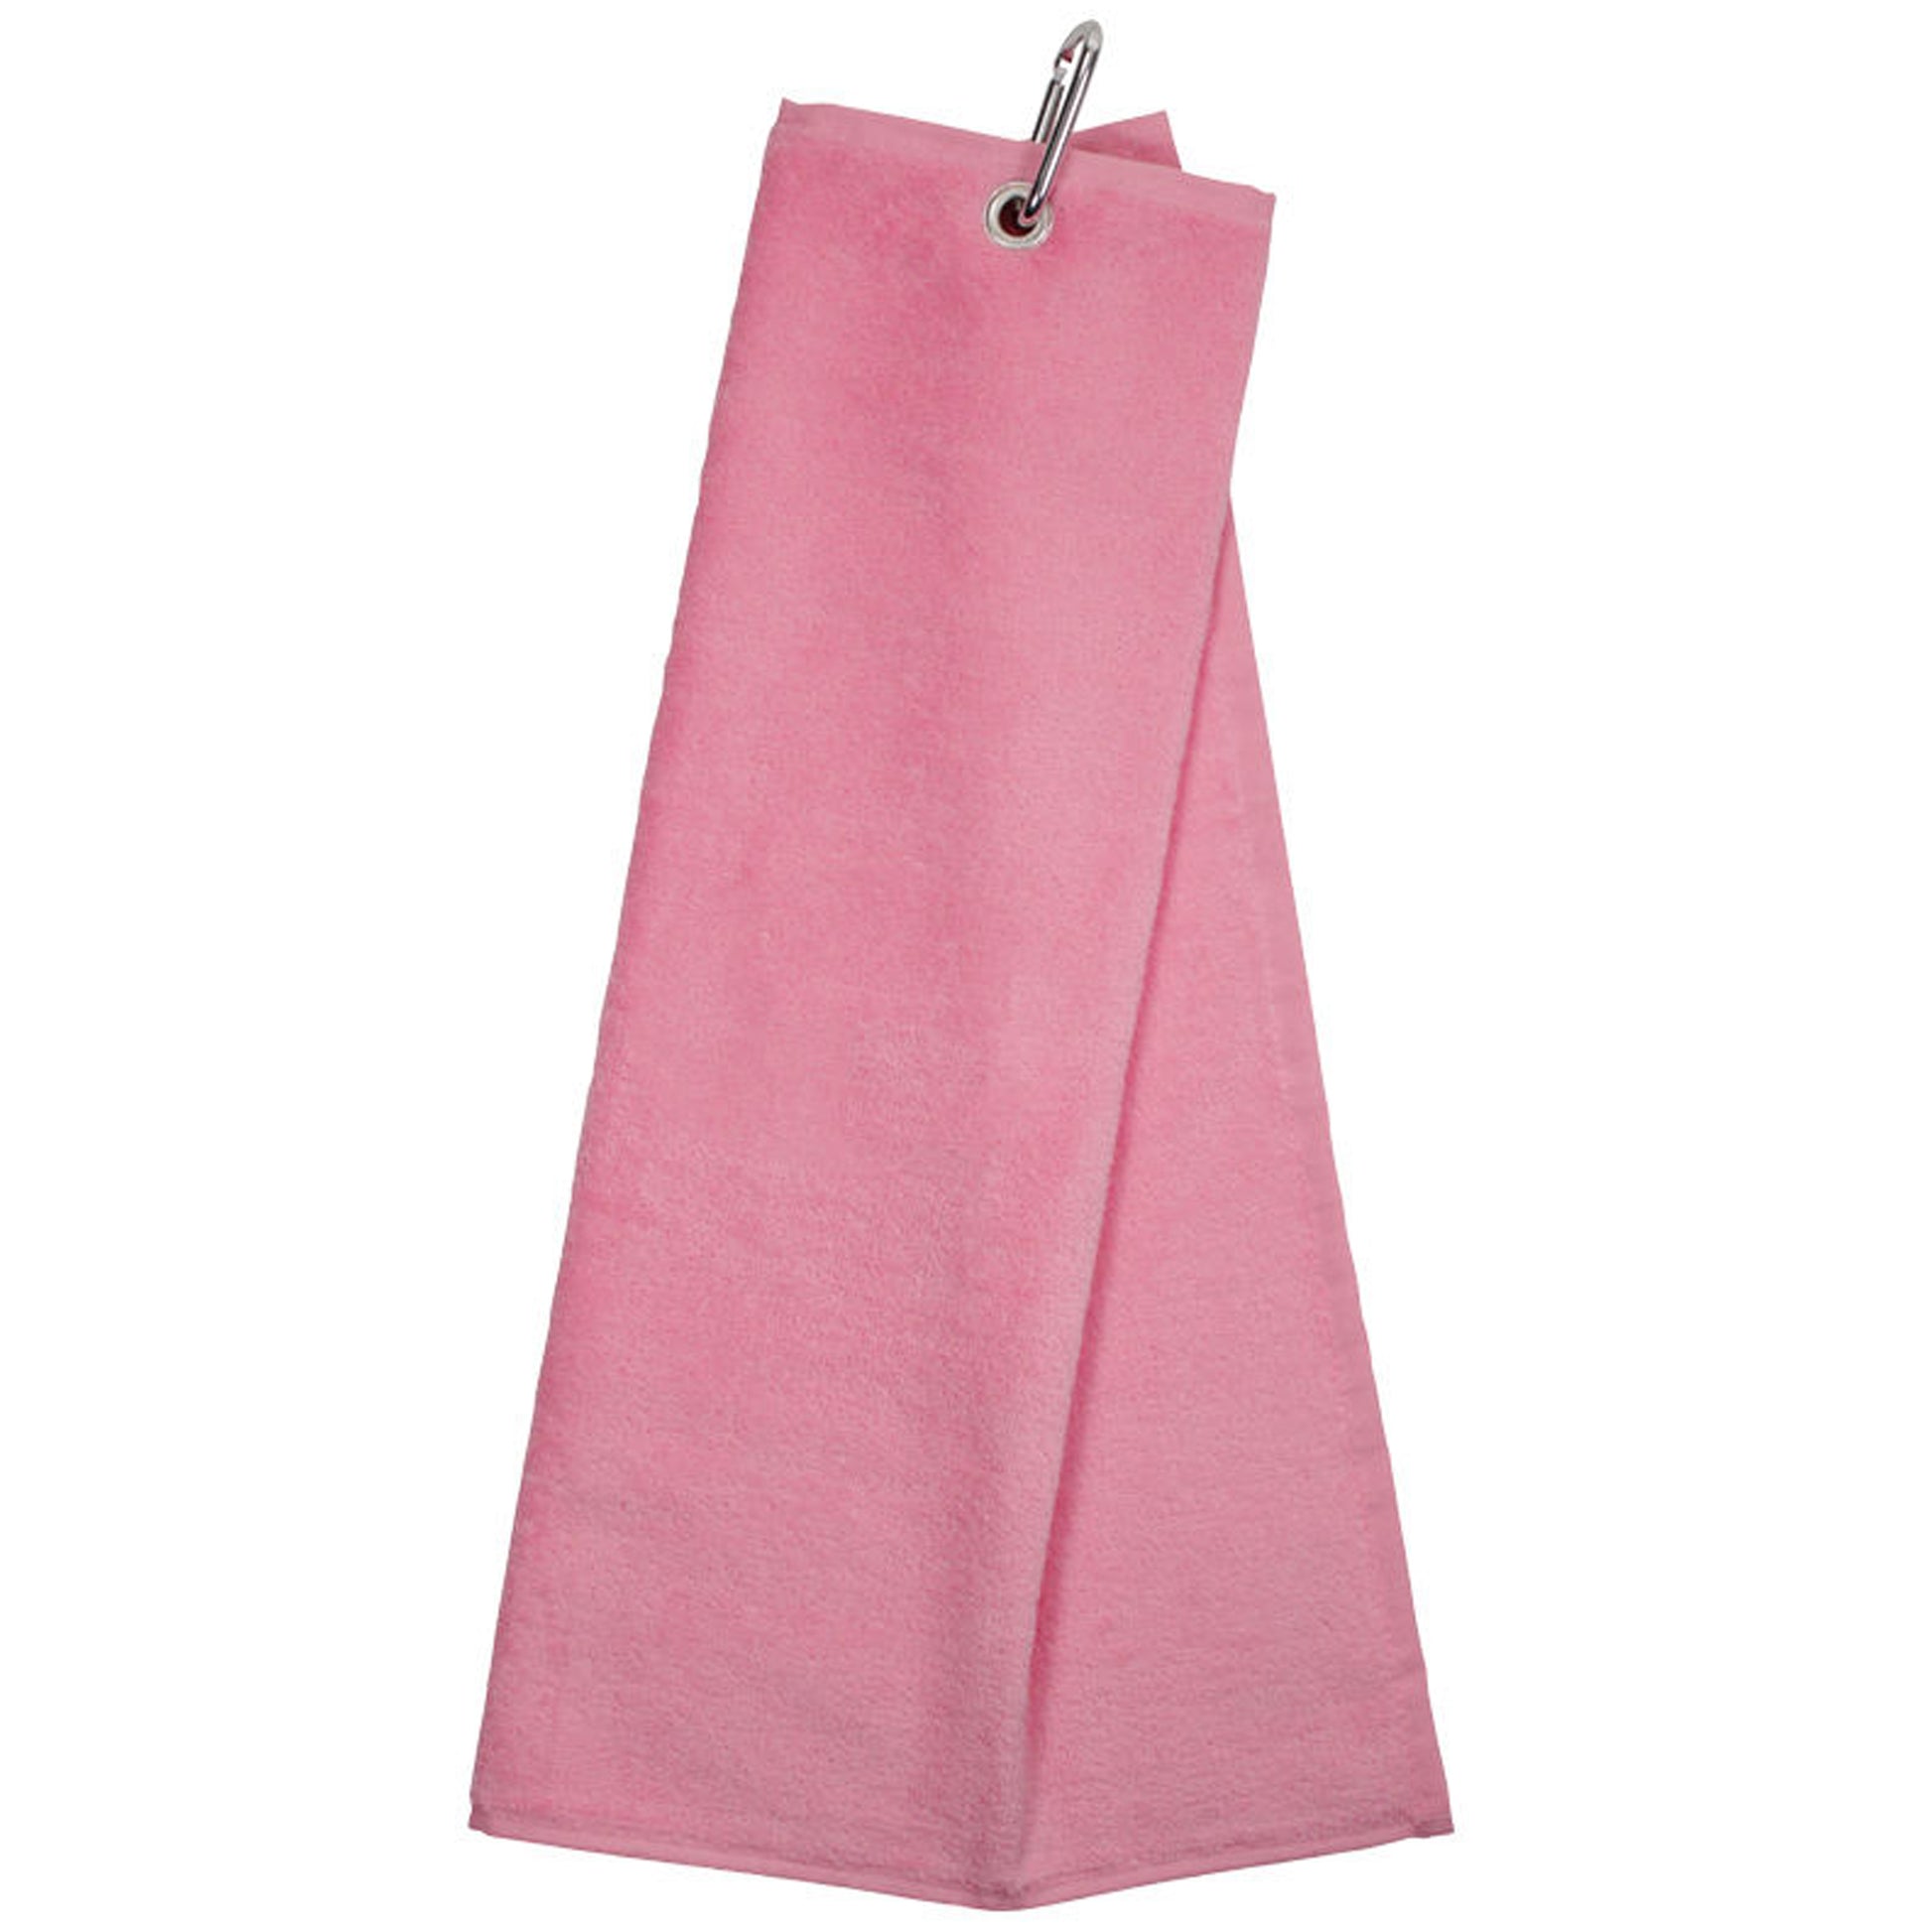 Personalised Embroidered Tri Fold TENNIS Towel Trifold with Carabiner Clip  - Always Looking Good - Pink  